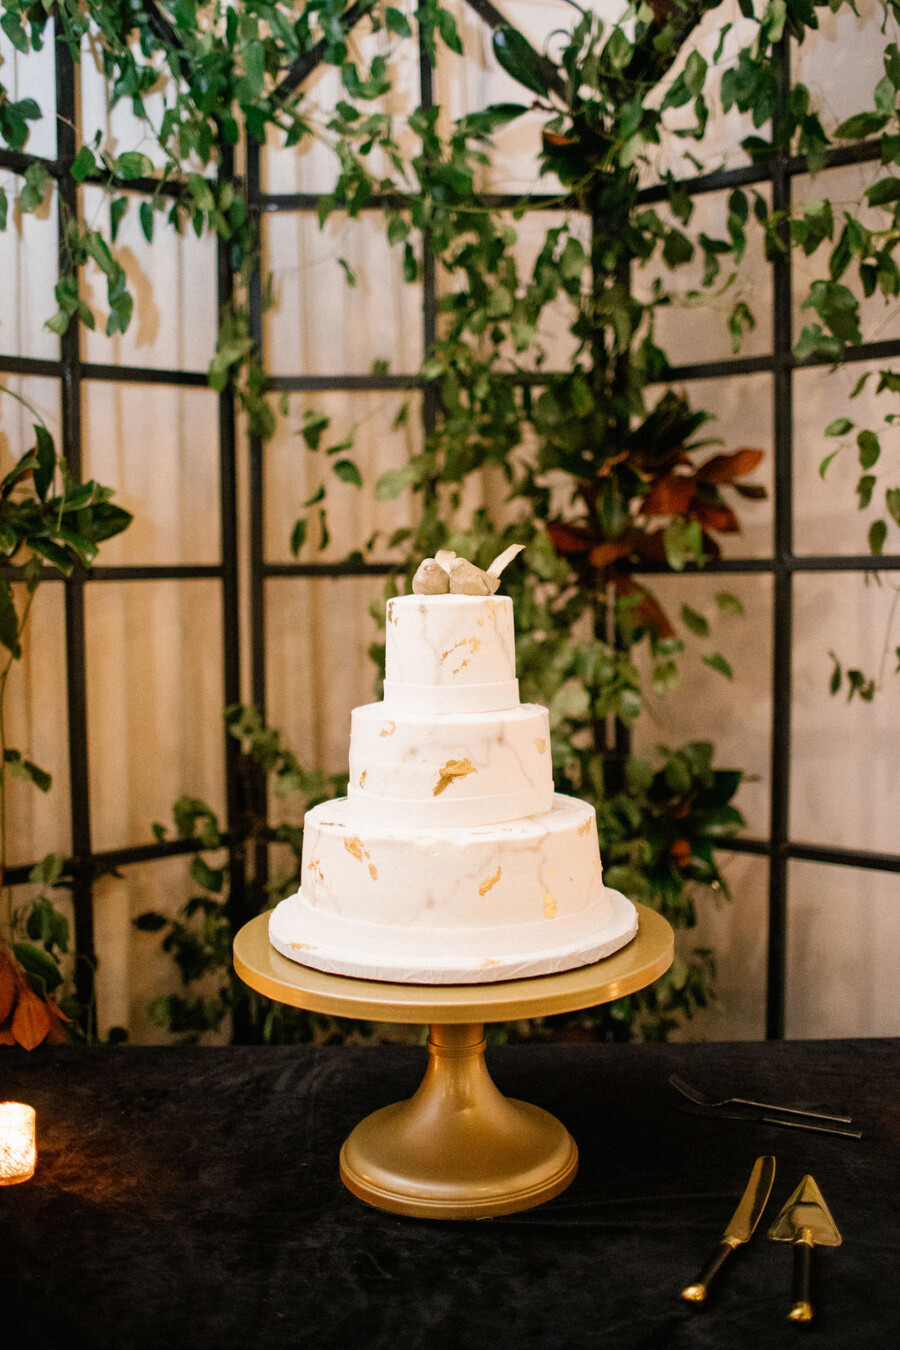 White wedding cake marbled with gold